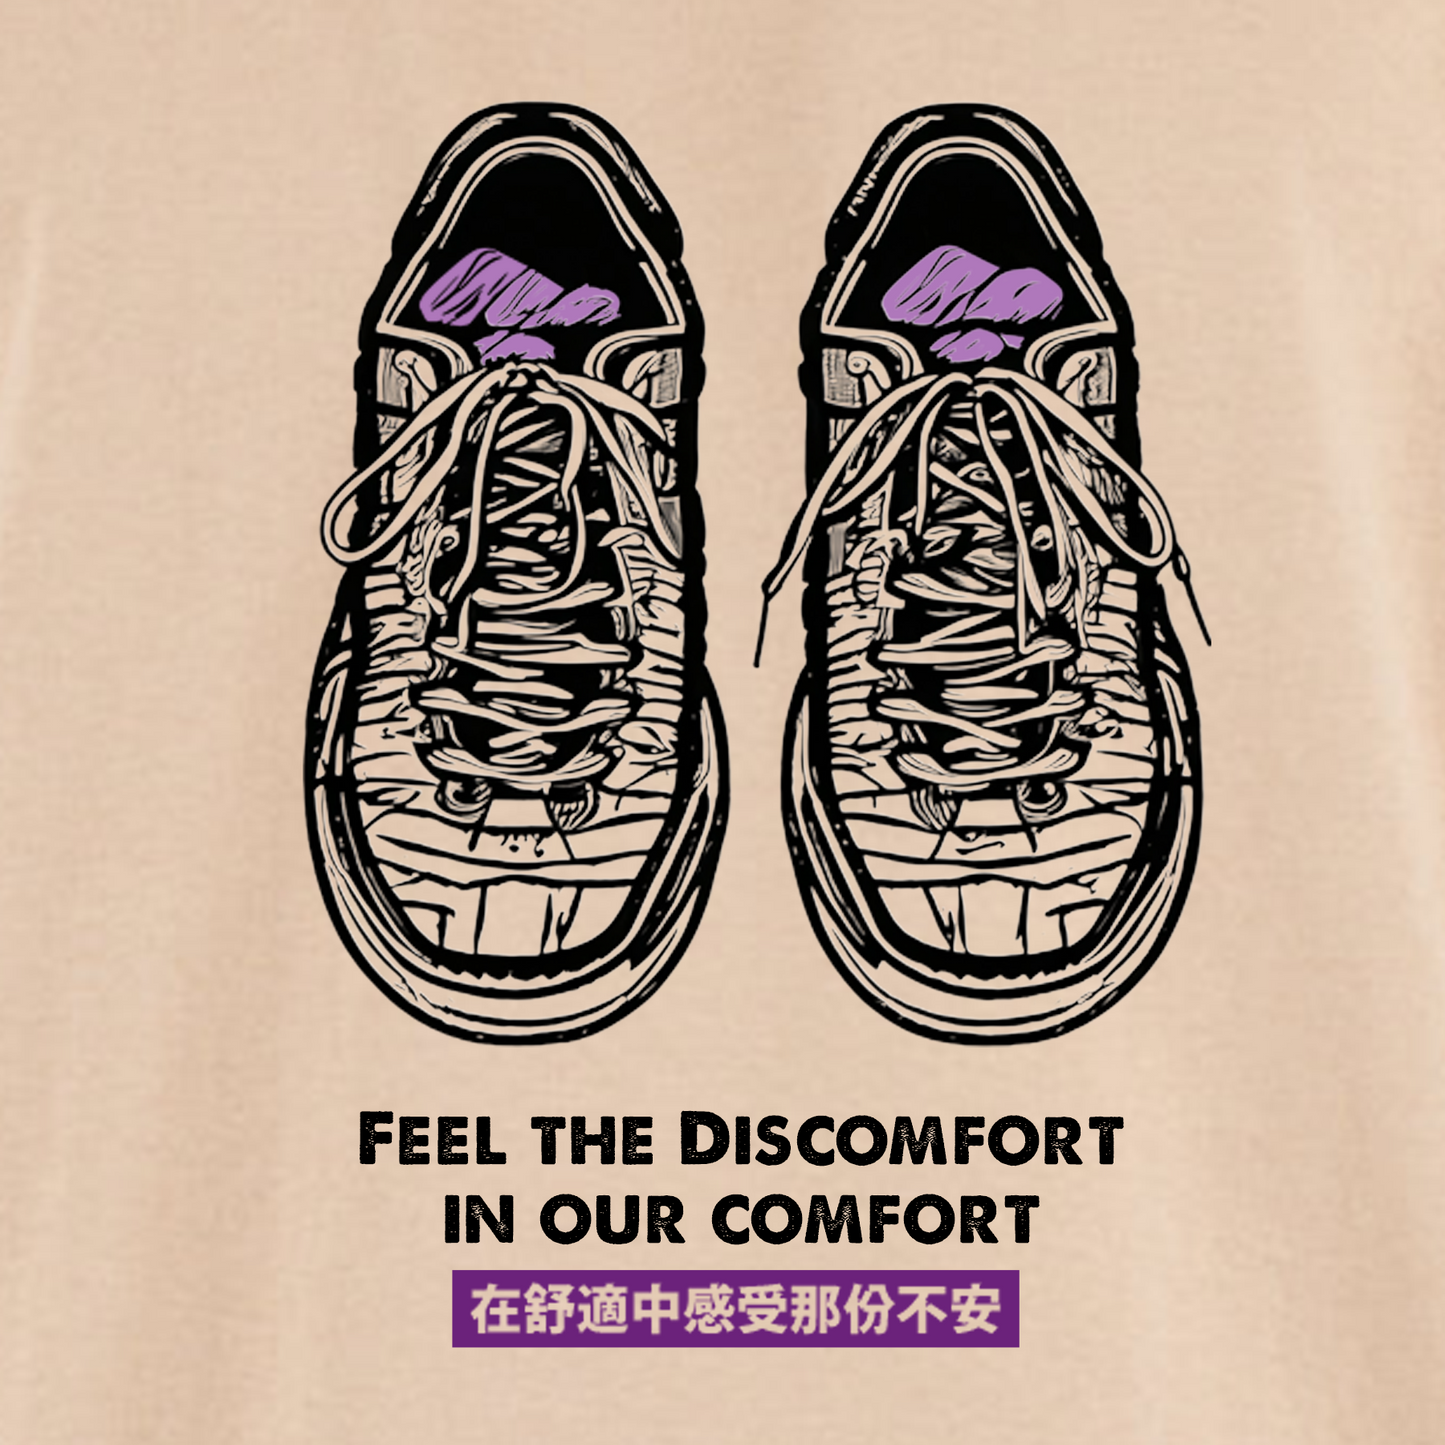 Feel the Discomfort in Our Comfort